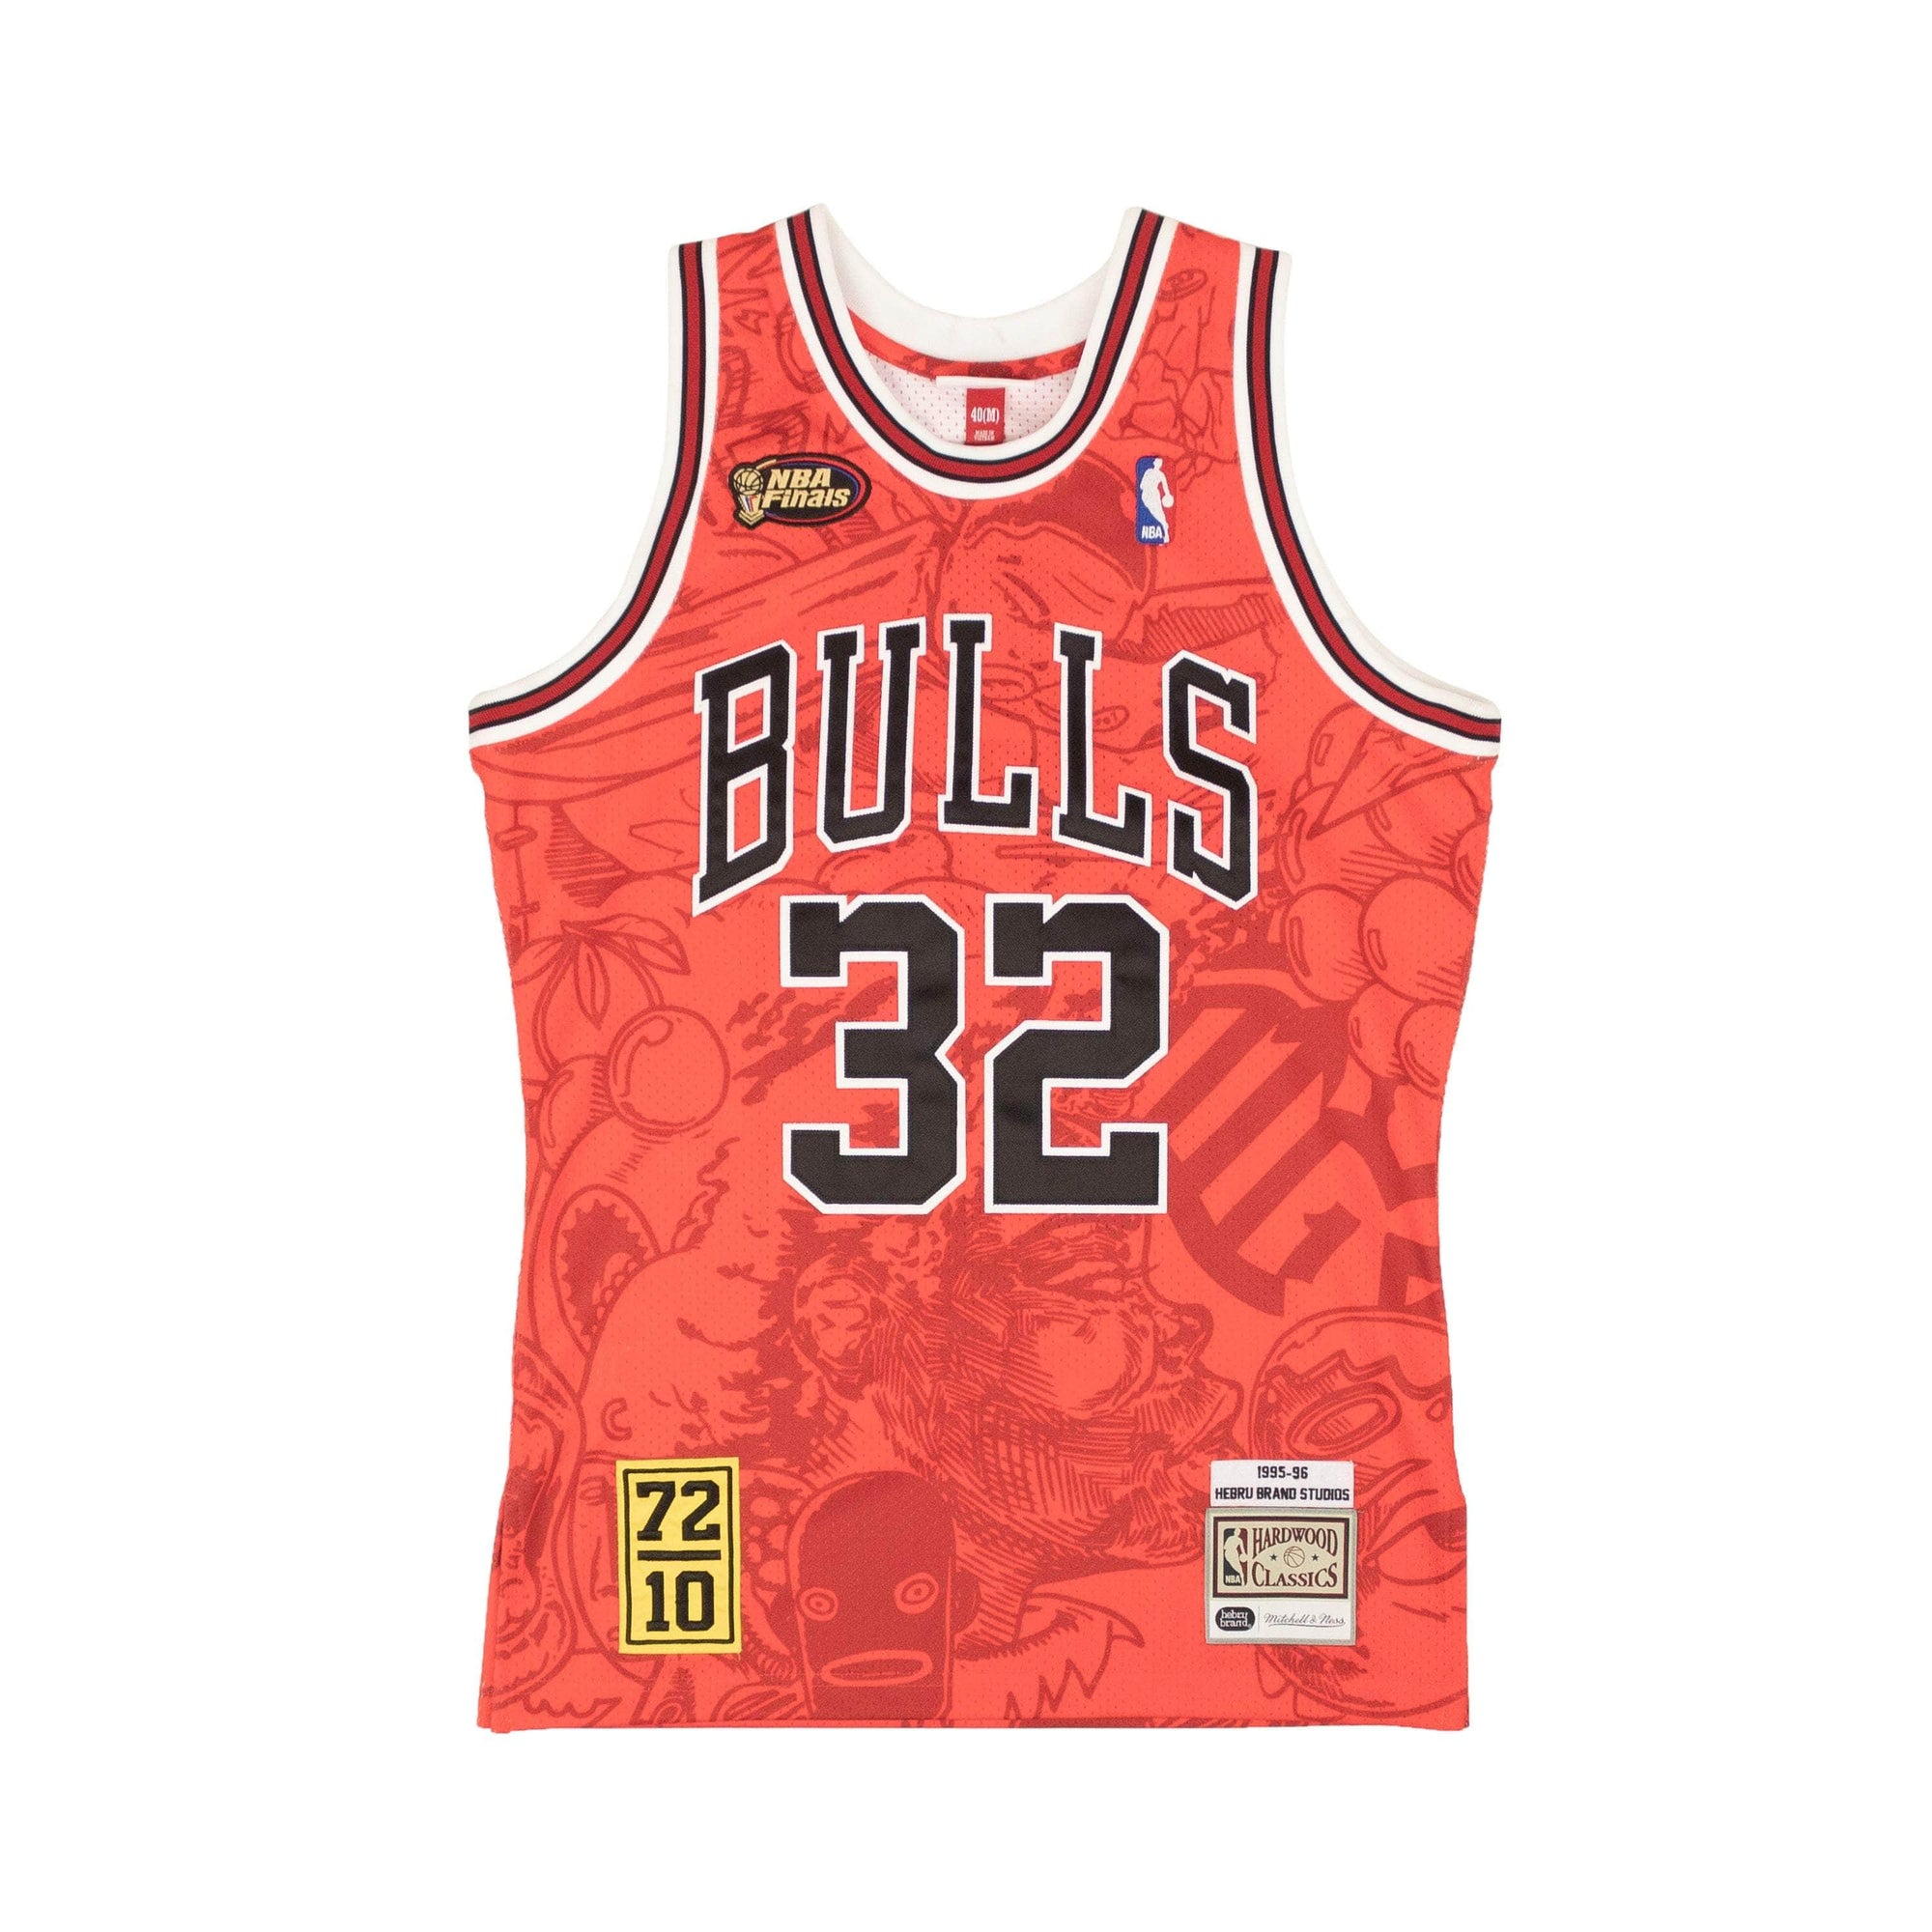 MITCHELL & NESS channelenable-all, chicmi, couponcollection, gender-mens, main-clothing M x Hebru Brantley Red Chicago Bulls Jersey MTN-XTPS-0001/M MTN-XTPS-0001/M